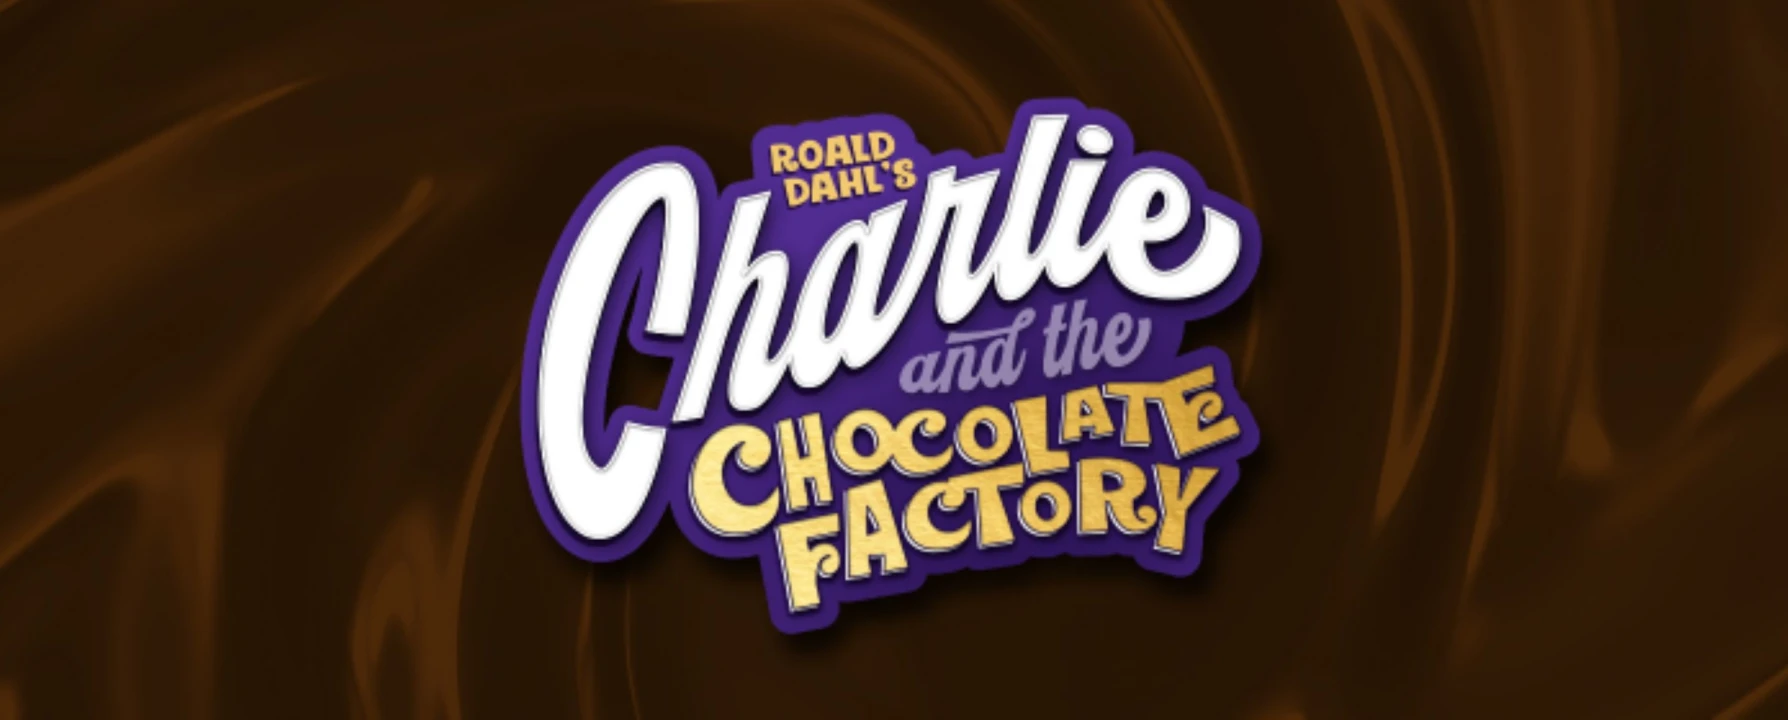 Charlie and the Chocolate Factory: What to expect - 1